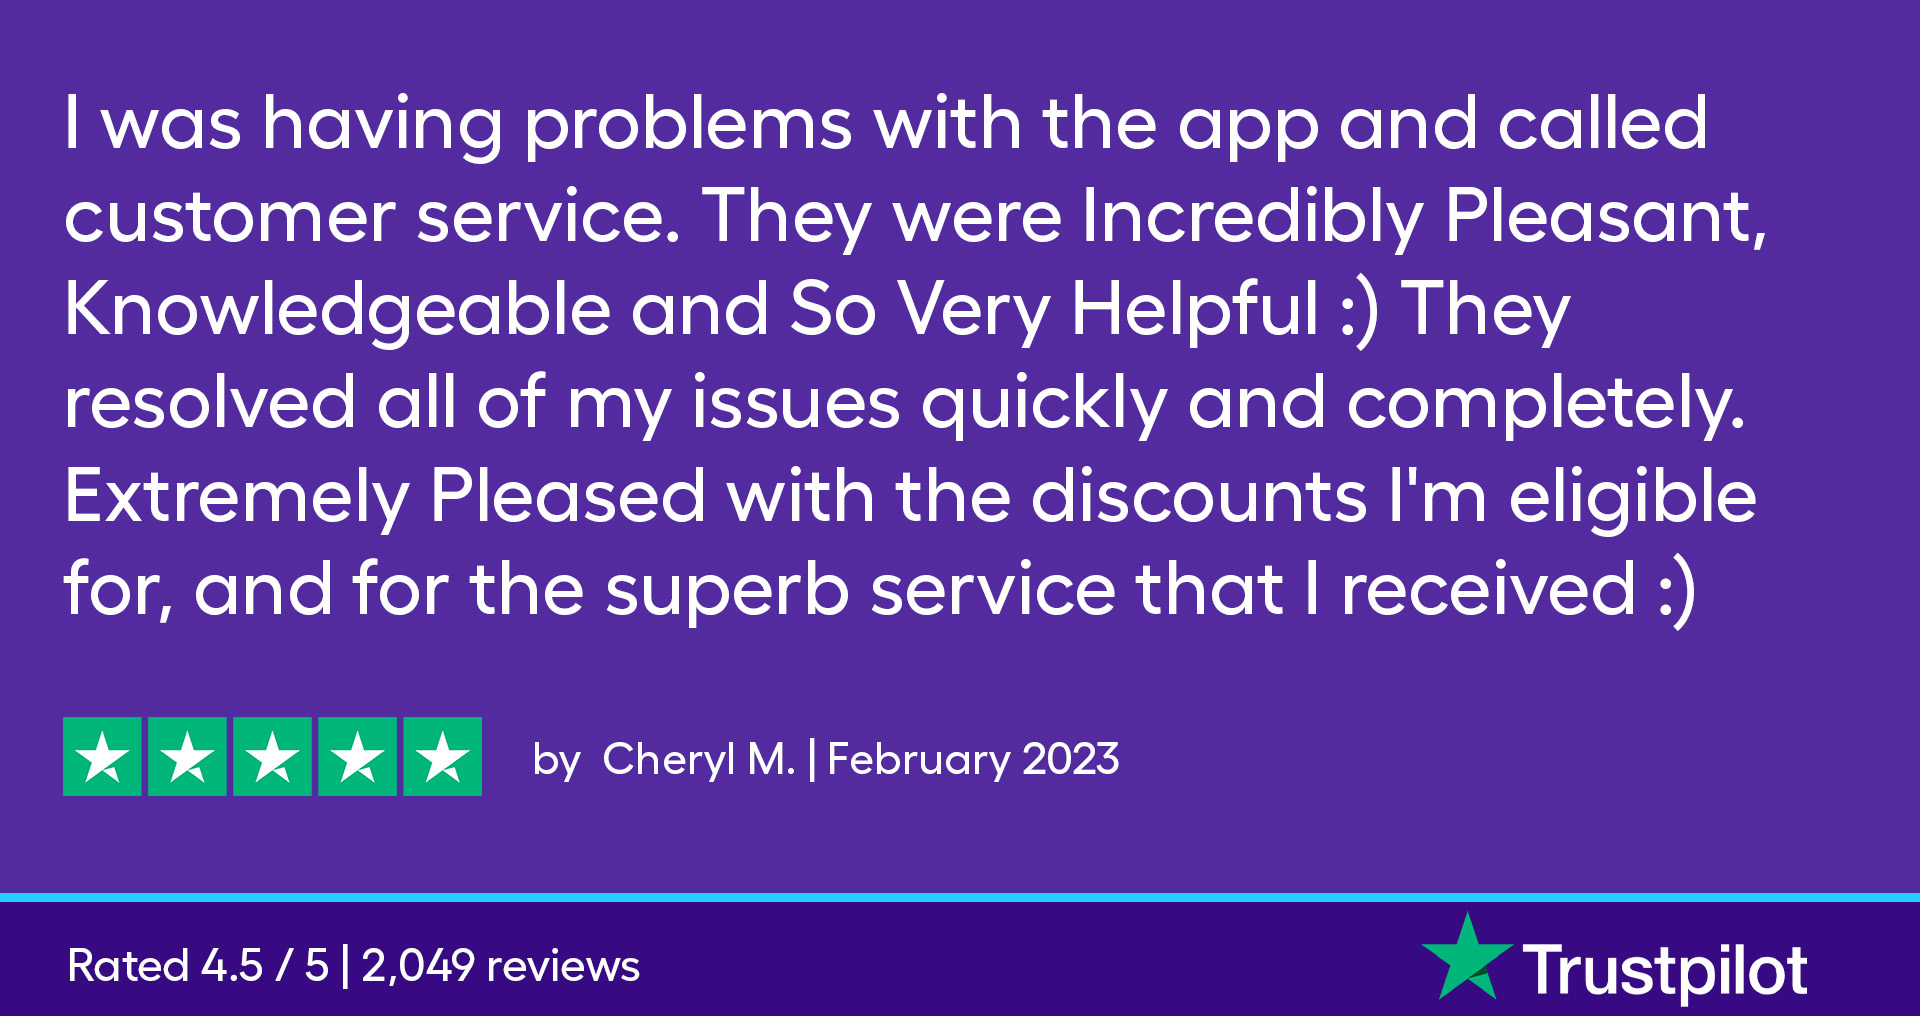 I was having problems with the app and called customer service. They were incredibly Pleasant, Knowledgeable and So Very Helpful :) They resolved all of my issues quickly and completely. Extremely pleased with the discounts I'm eligible for, and for the superb service that I received :)